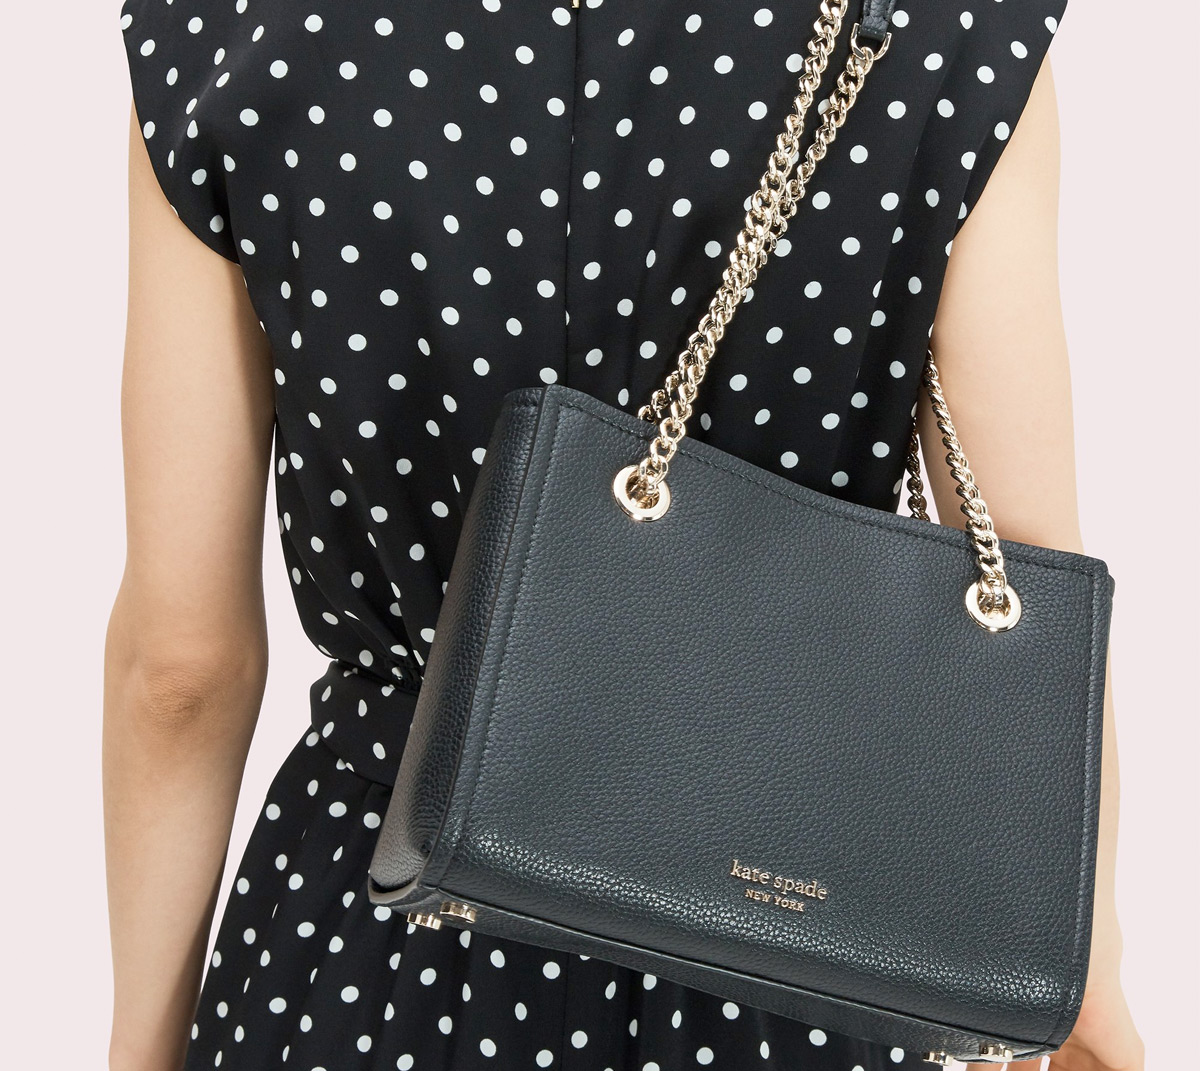 kate spade bag with chain